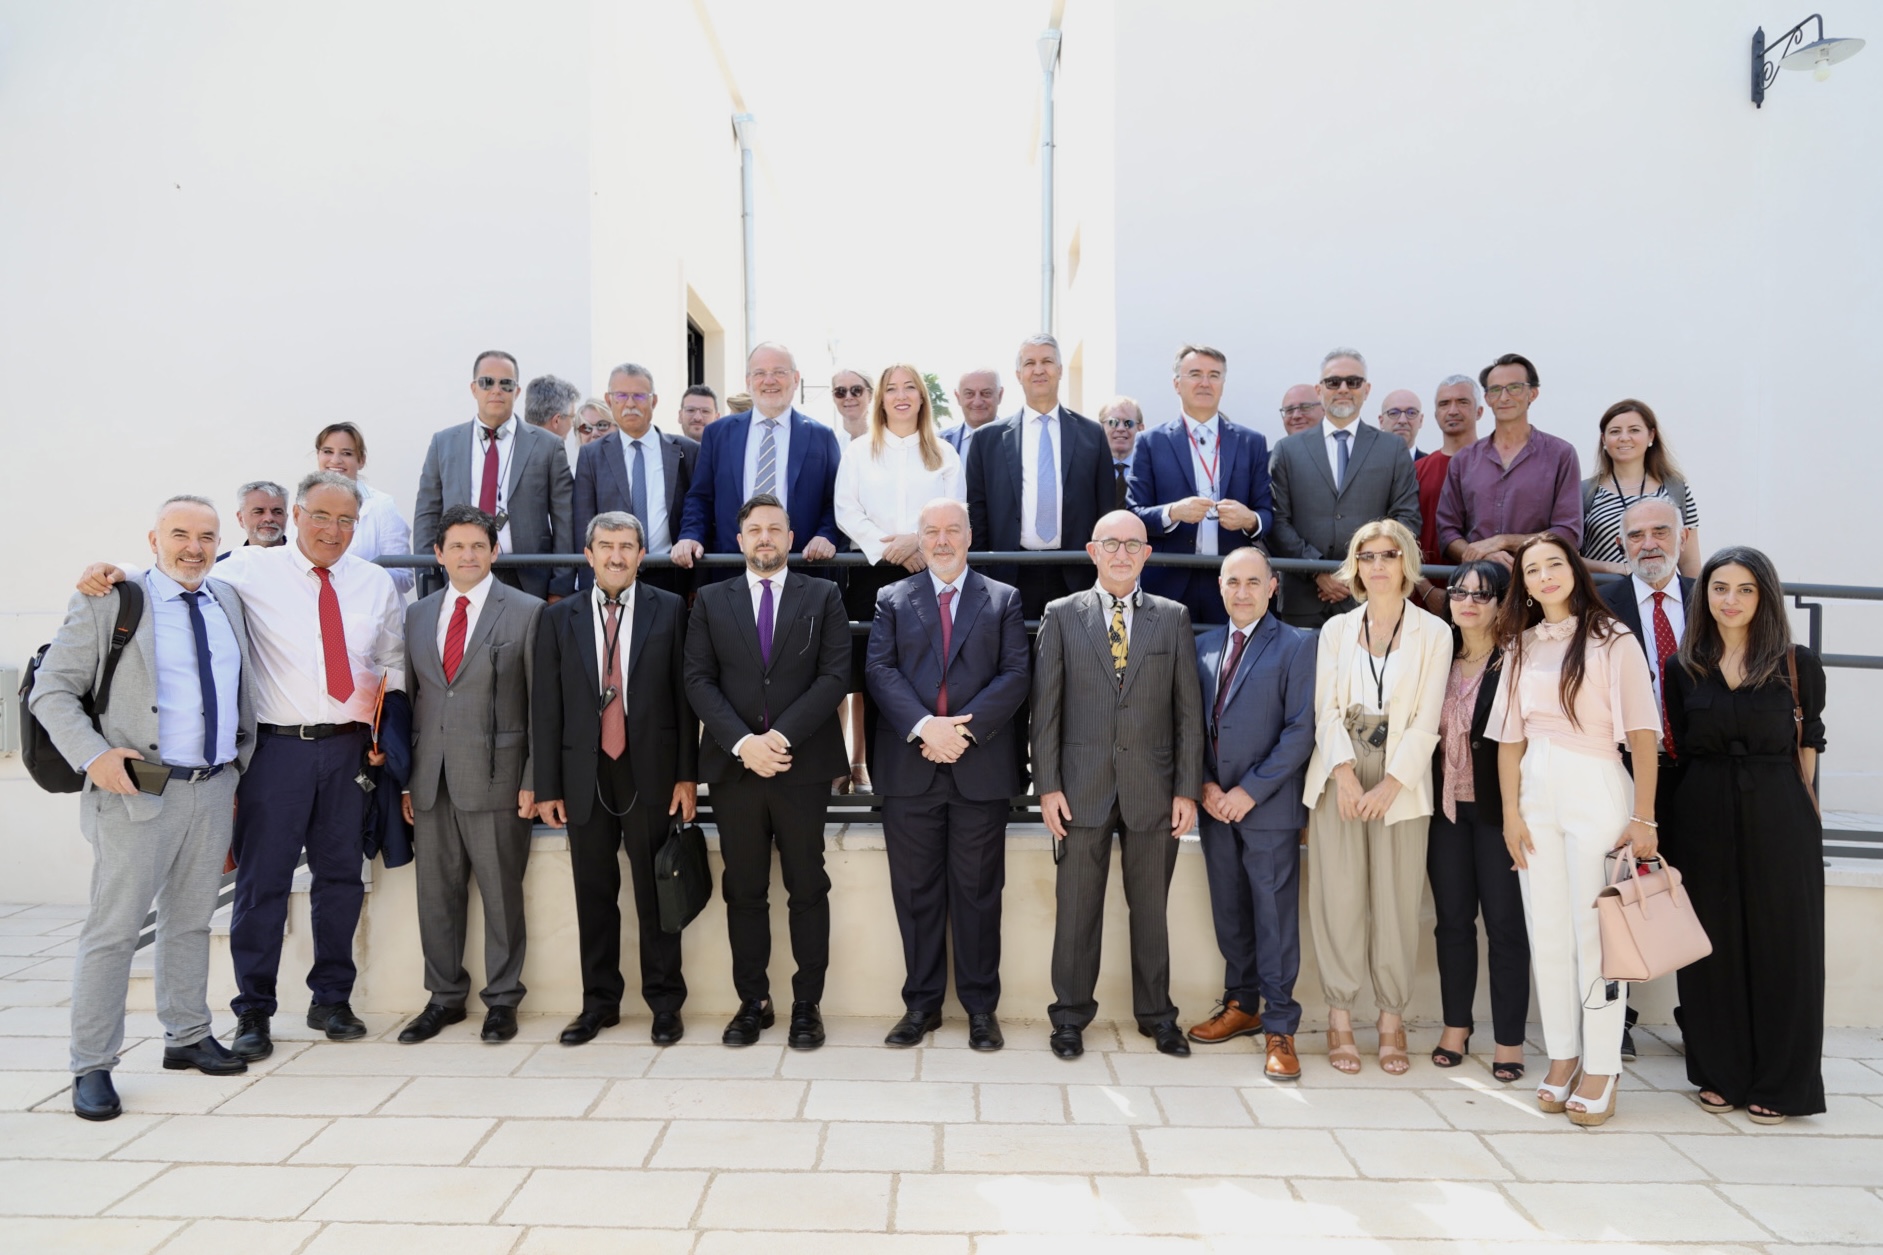 153rd  MEETING OF THE CIHEAM GOVERNING BOARD MARKED BY A MOMENTUM FOR RENEWAL AND TRIBUTES